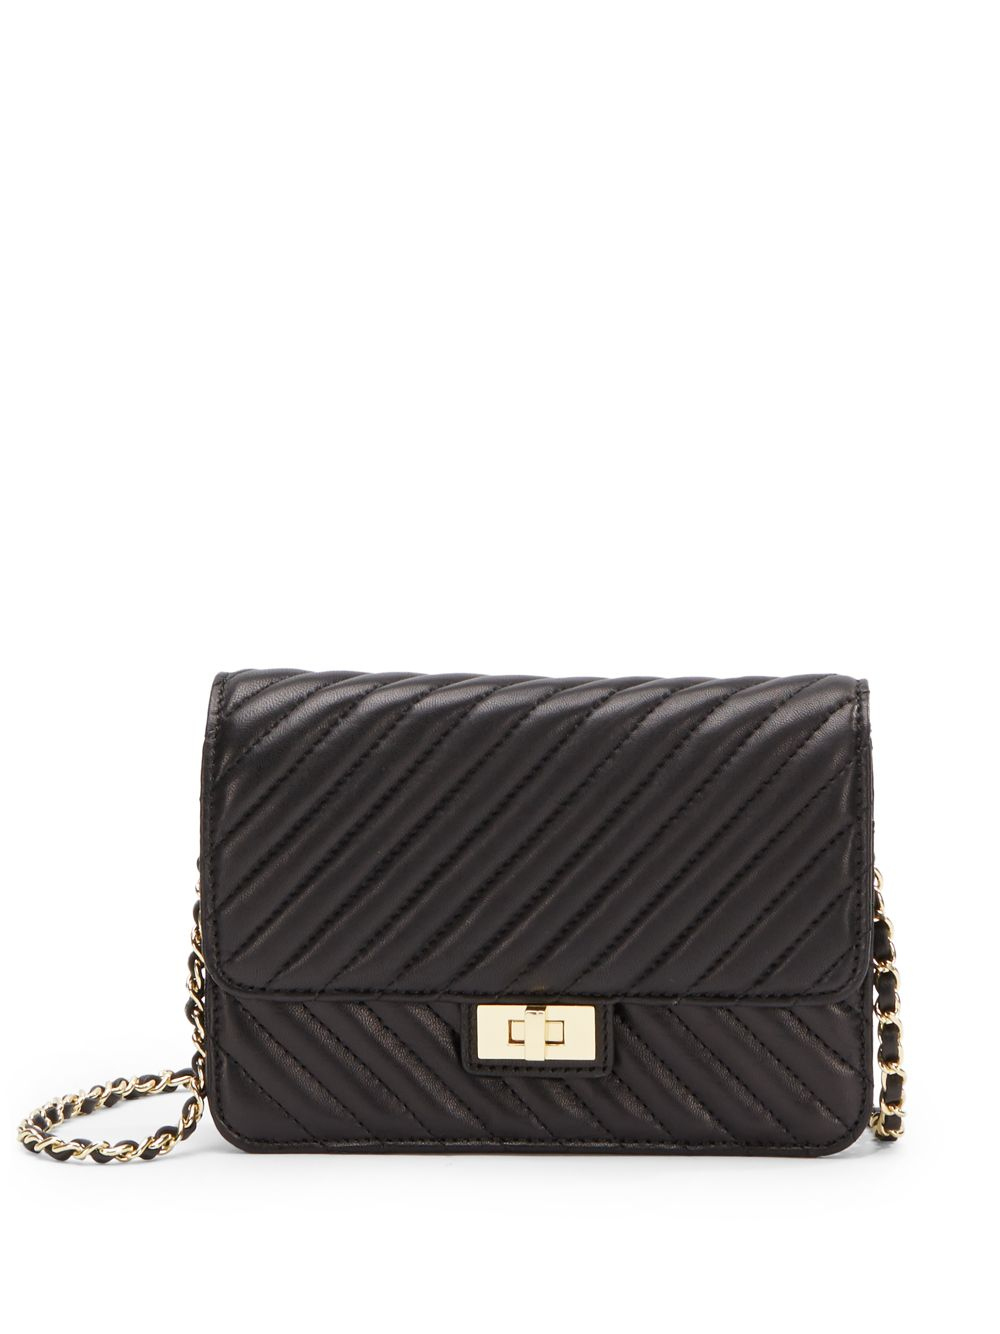 Saks fifth avenue Sindy Quilted Leather Shoulder Bag in Black | Lyst